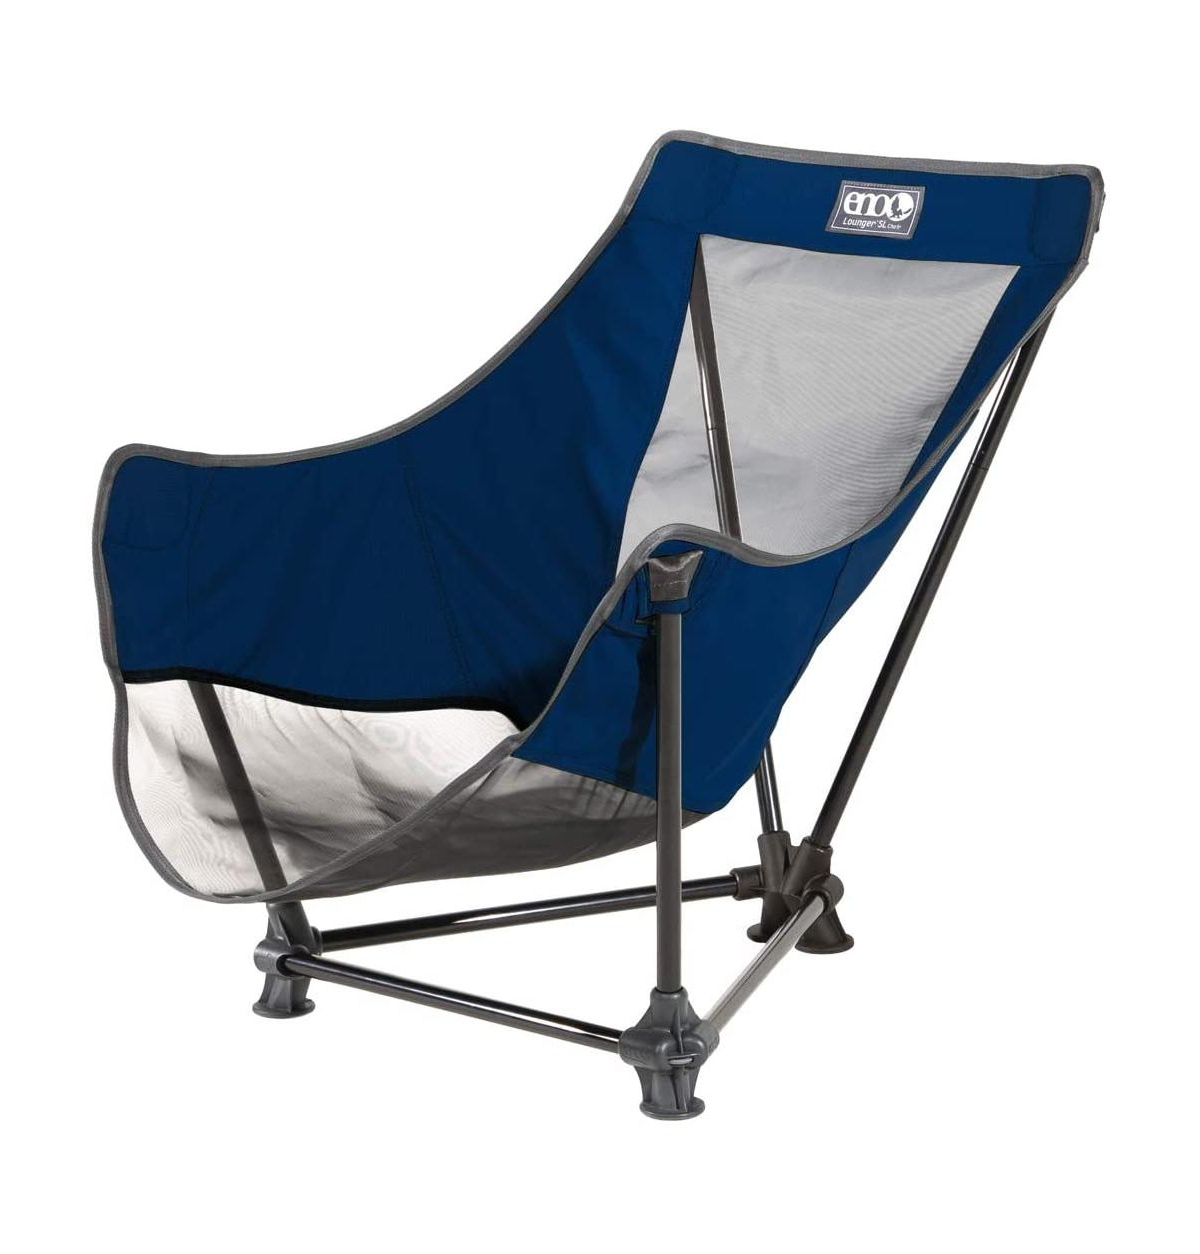 Lounger Sl Chair - Lightweight Portable Outdoor Hiking, Backpacking, Beach, Camping, and Festival Hammock Chair - Navy - Navy